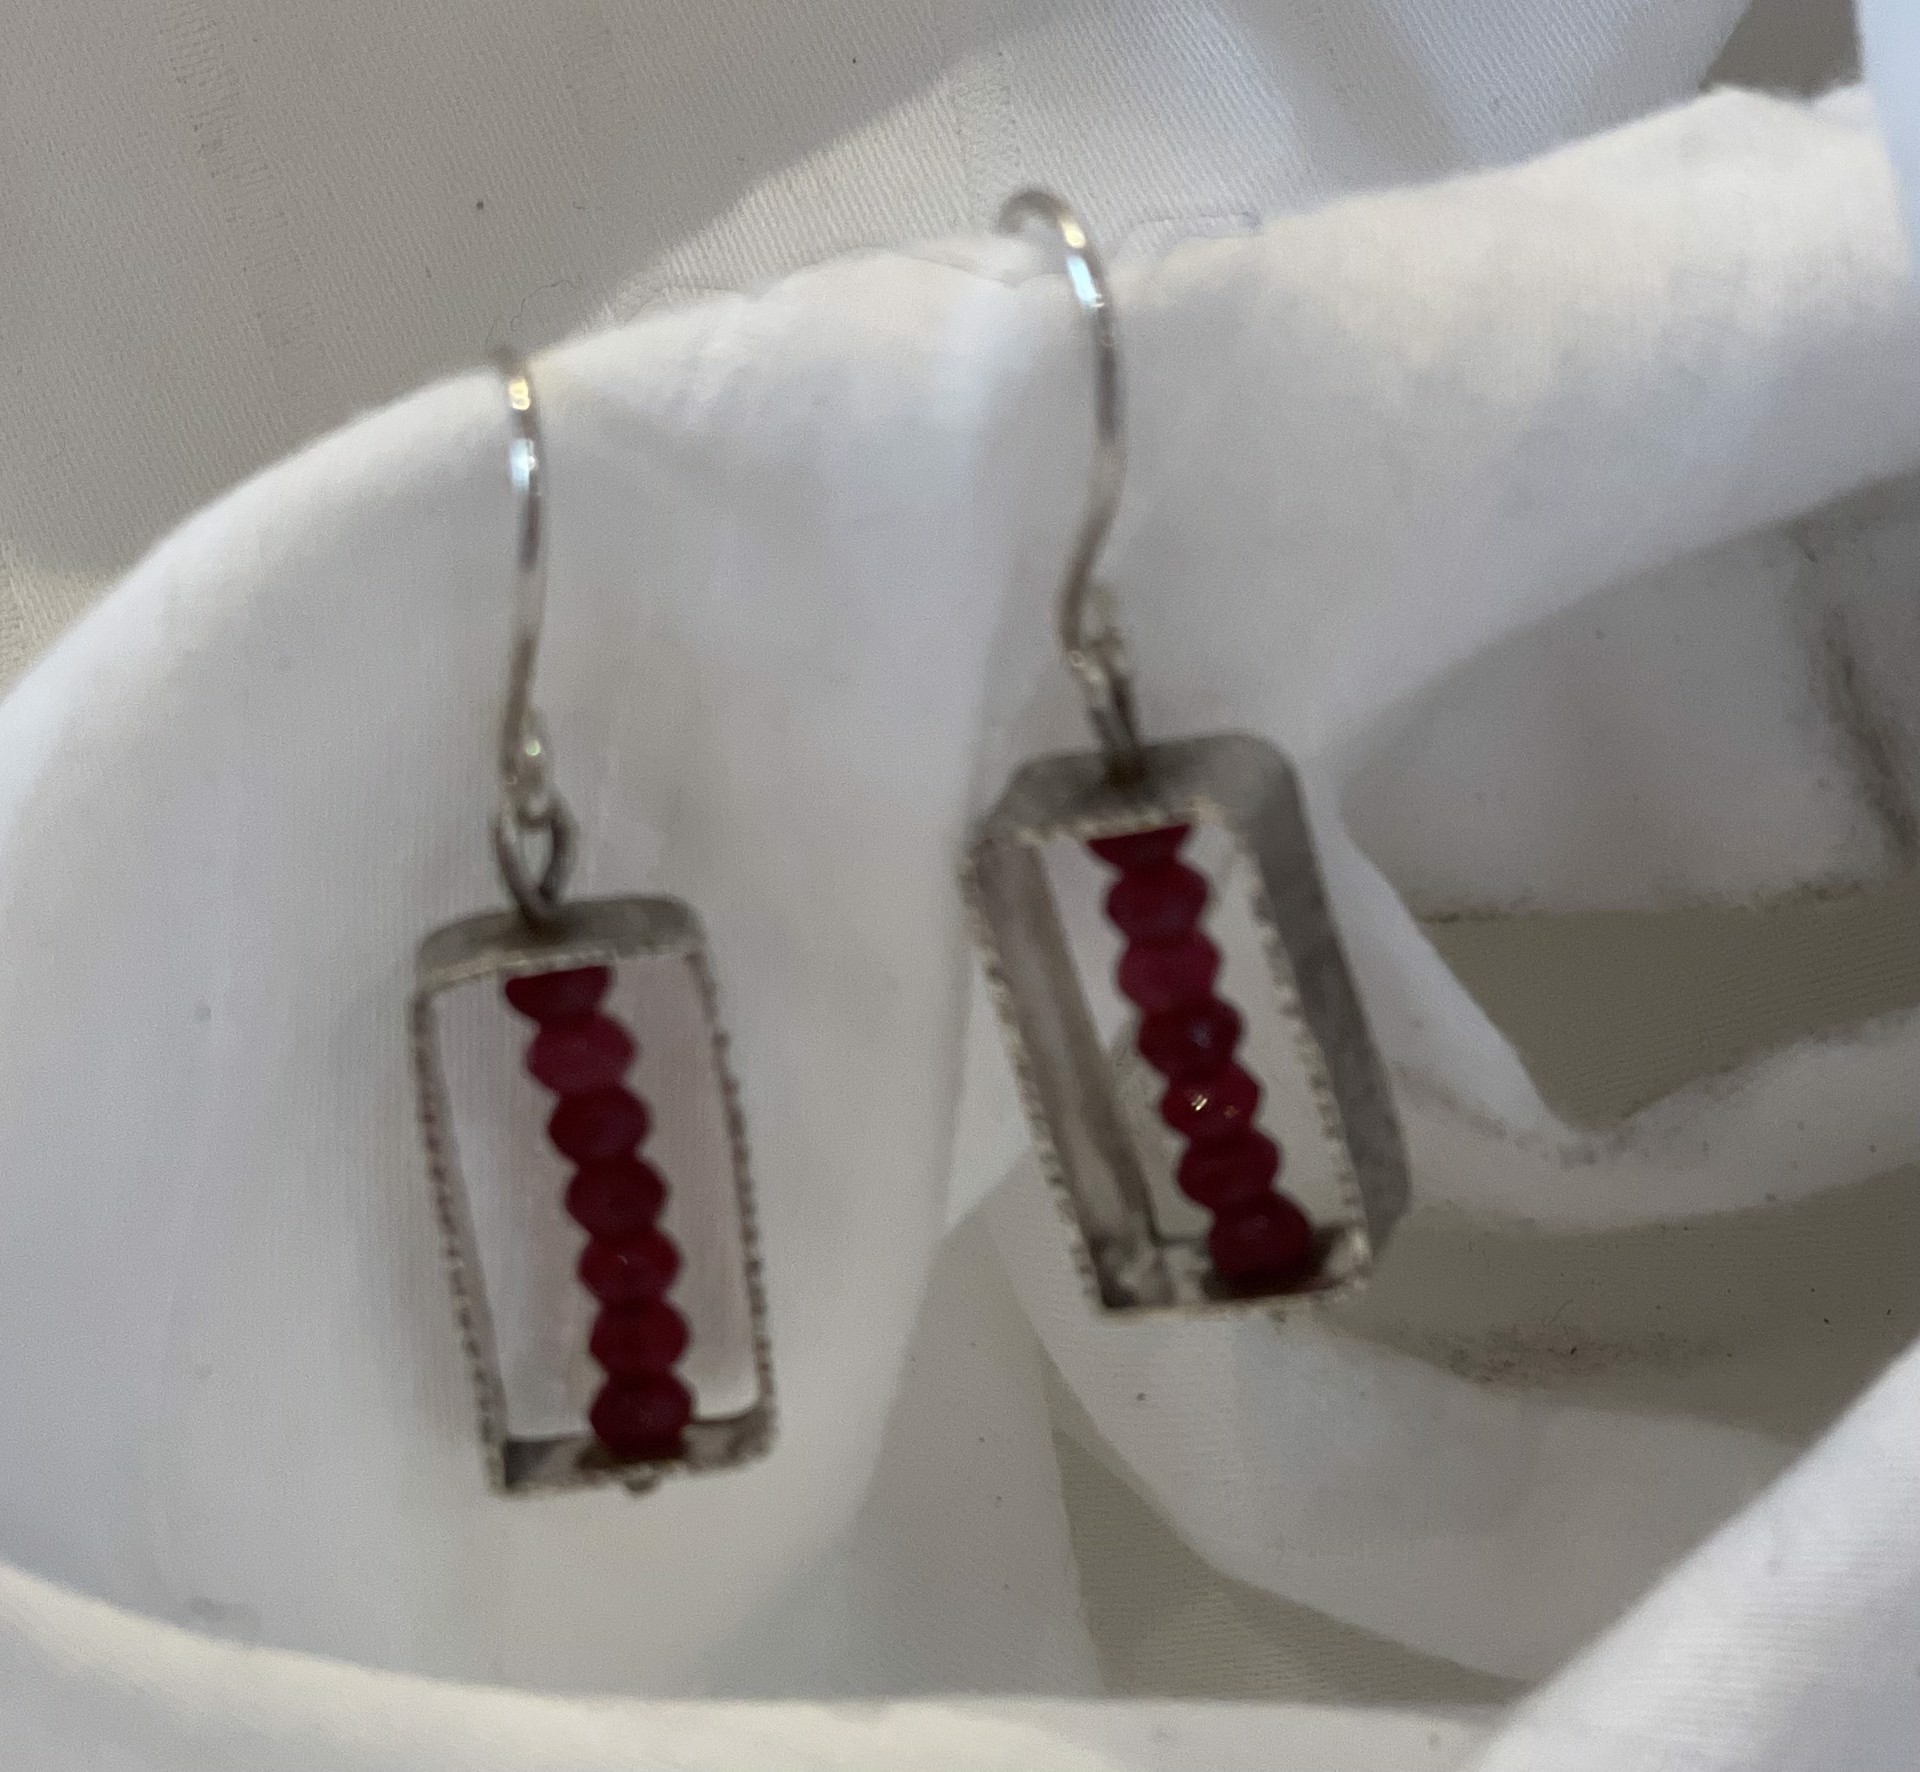 Earrings - Red Tourmaline Bead Earring In Sterling SIlver Wire AC 260 by Annette Campbell